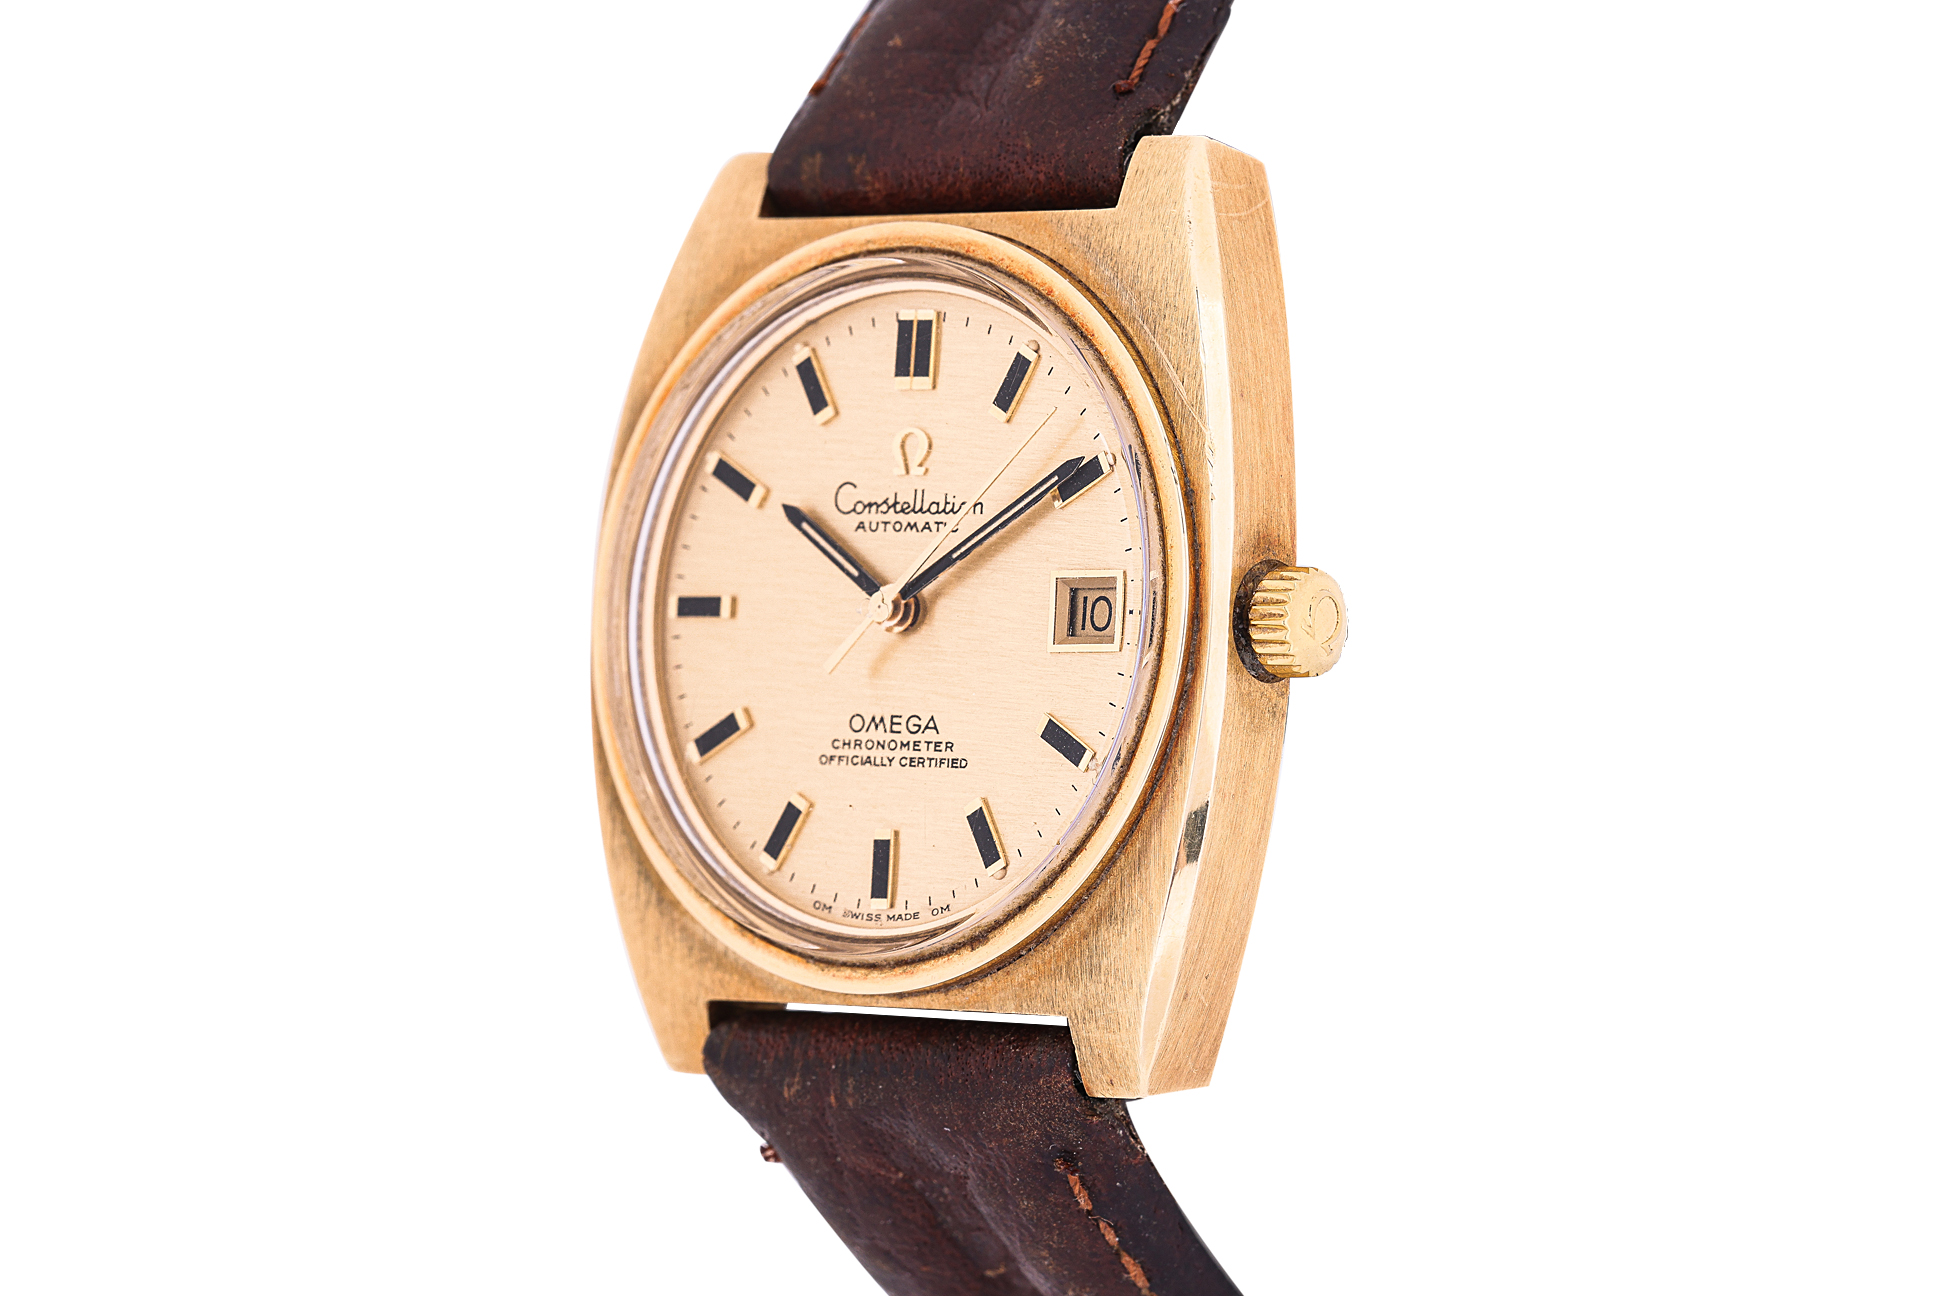 AN OMEGA GOLD CONSTELLATION AUTOMATIC WATCH - Image 2 of 3